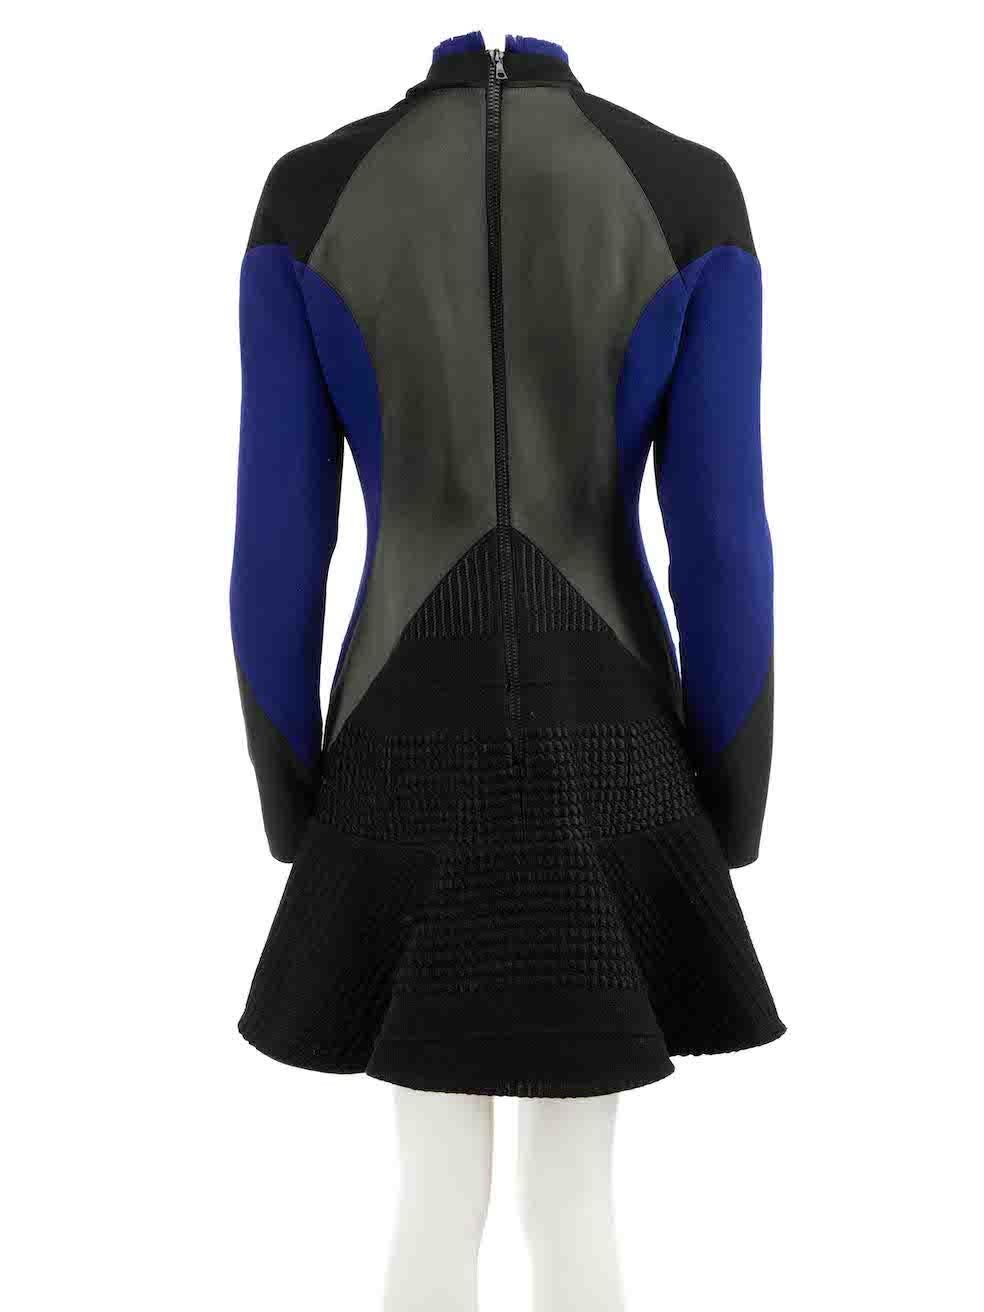 Stella McCartney Black Panelled Long Sleeve Dress Size L In Good Condition For Sale In London, GB